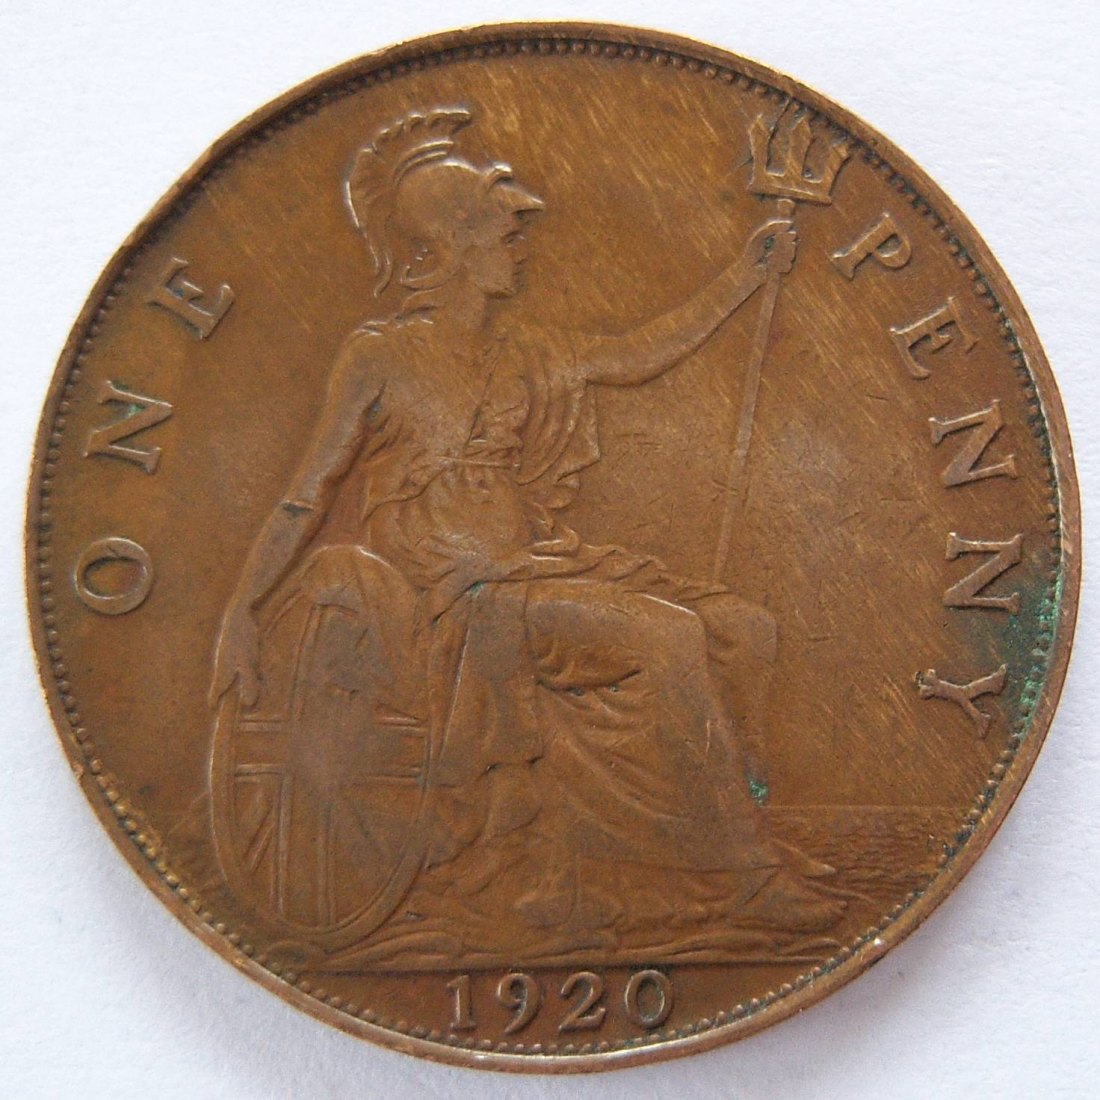  Grossbritannien One 1 Penny 1920   